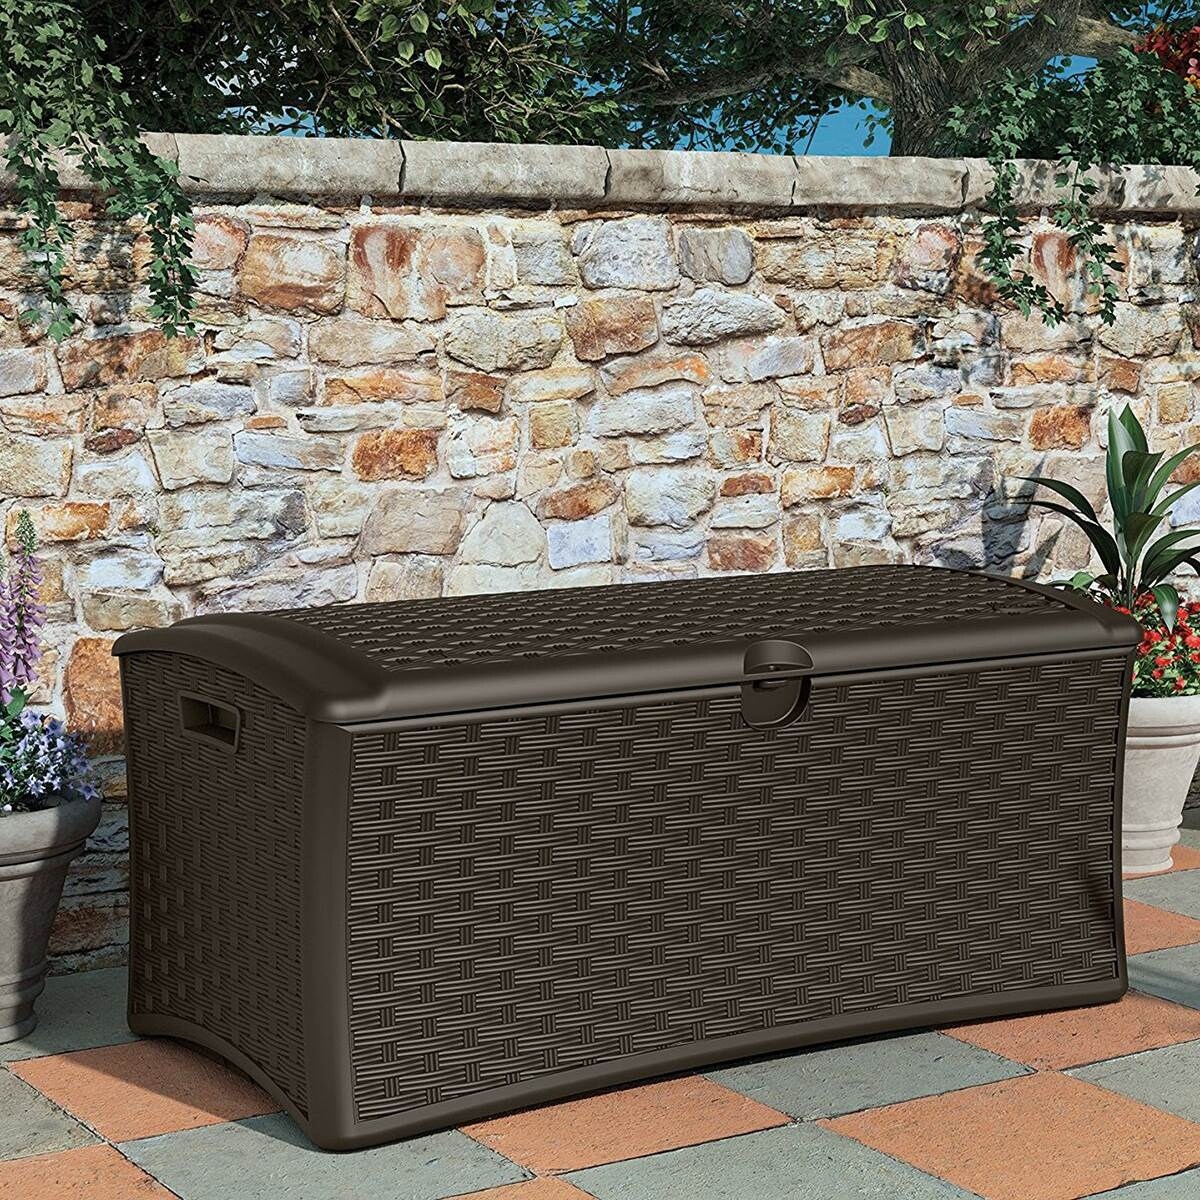 Suncast 73 Gallon Resin Deck Box With Wheels, Taupe/Brown